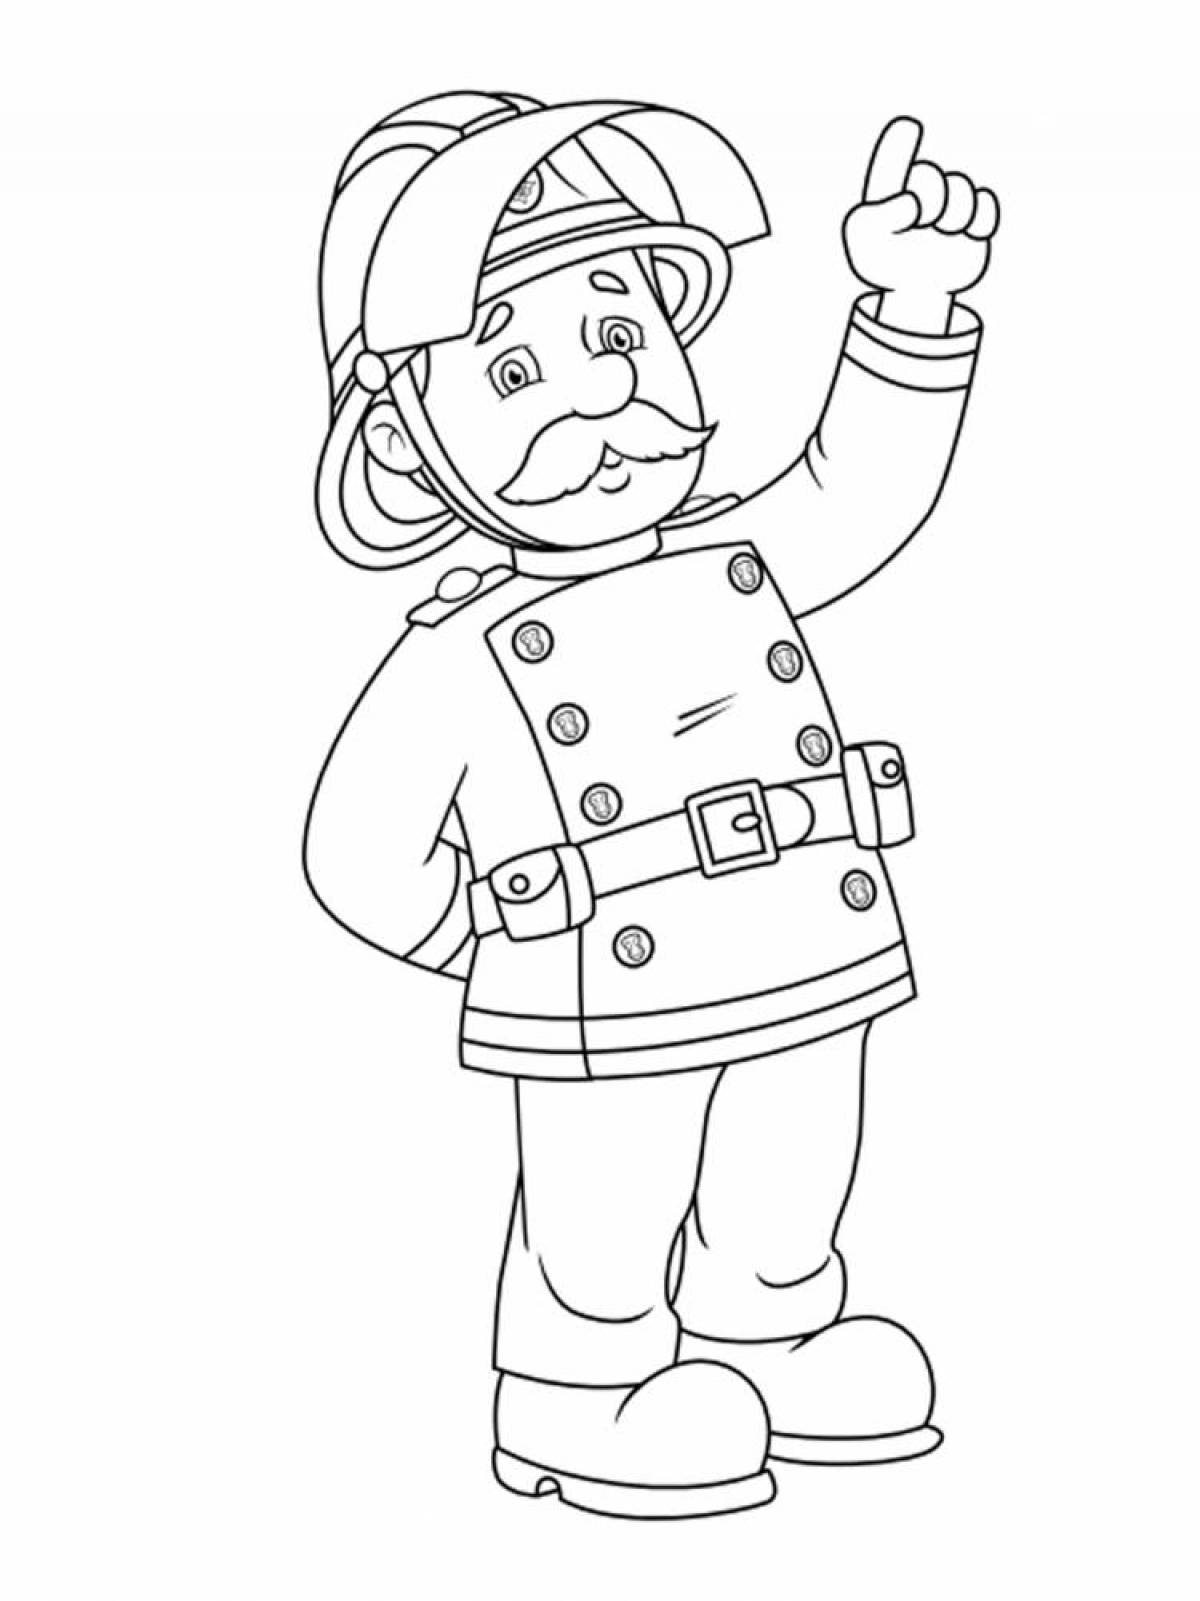 Witty firefighter coloring page for kids